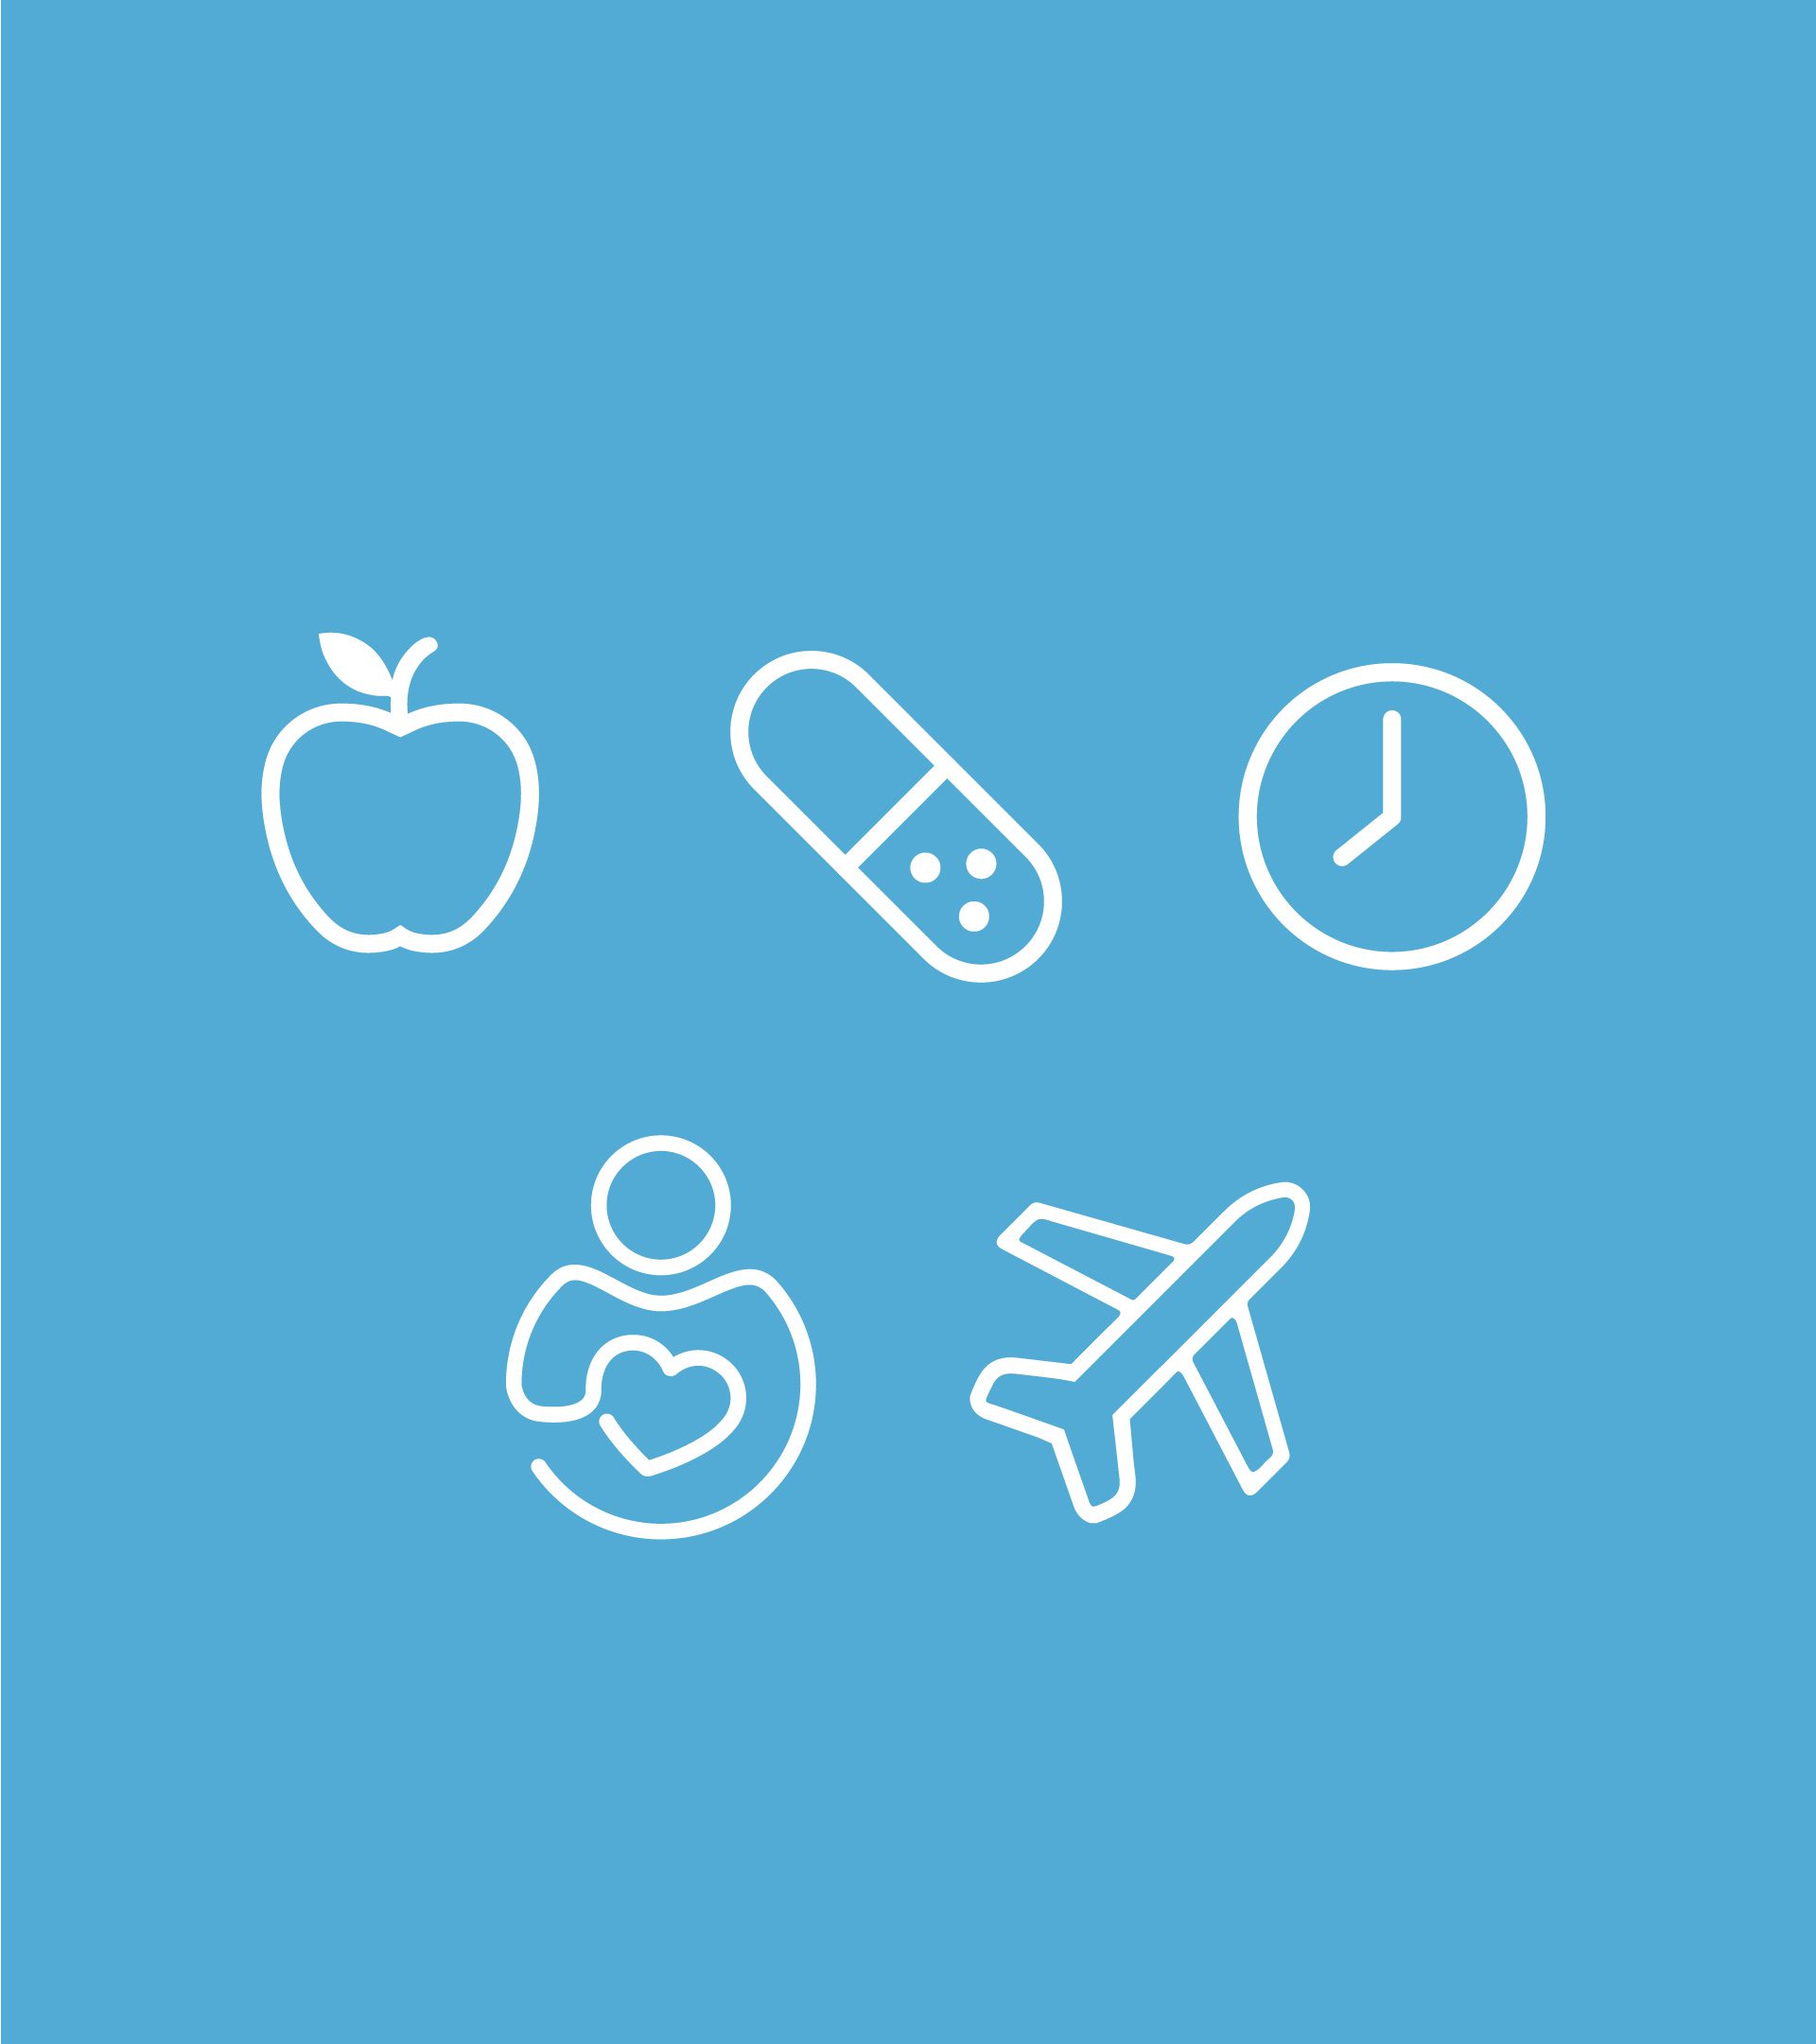 blue background with white icons - apple, pill, clock. health (person holding a. heart) and an airplane